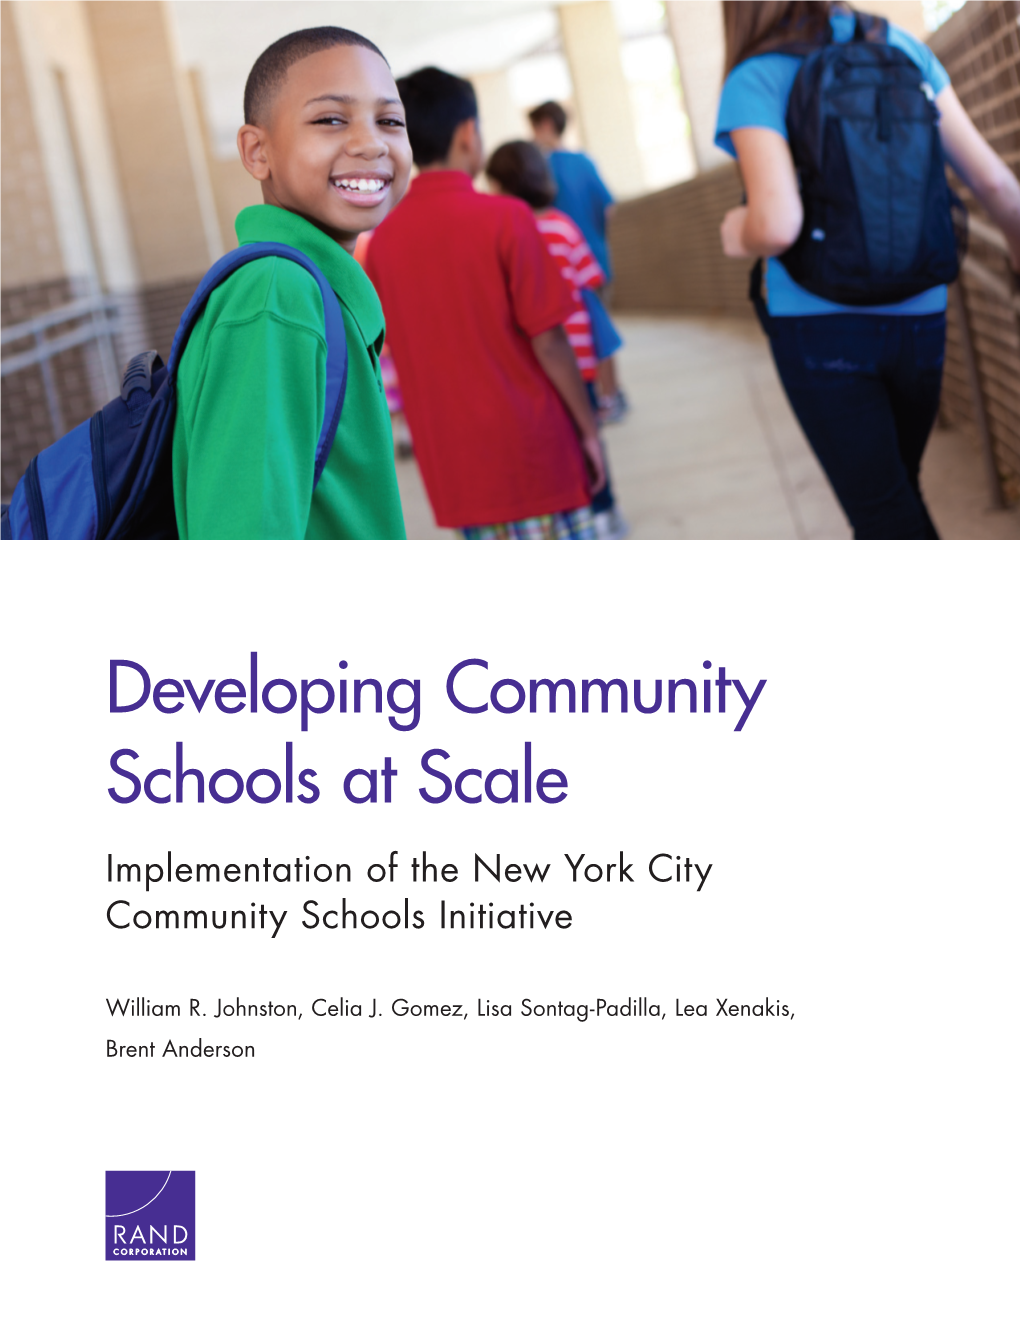 Implementation of the New York City Community Schools Initiative